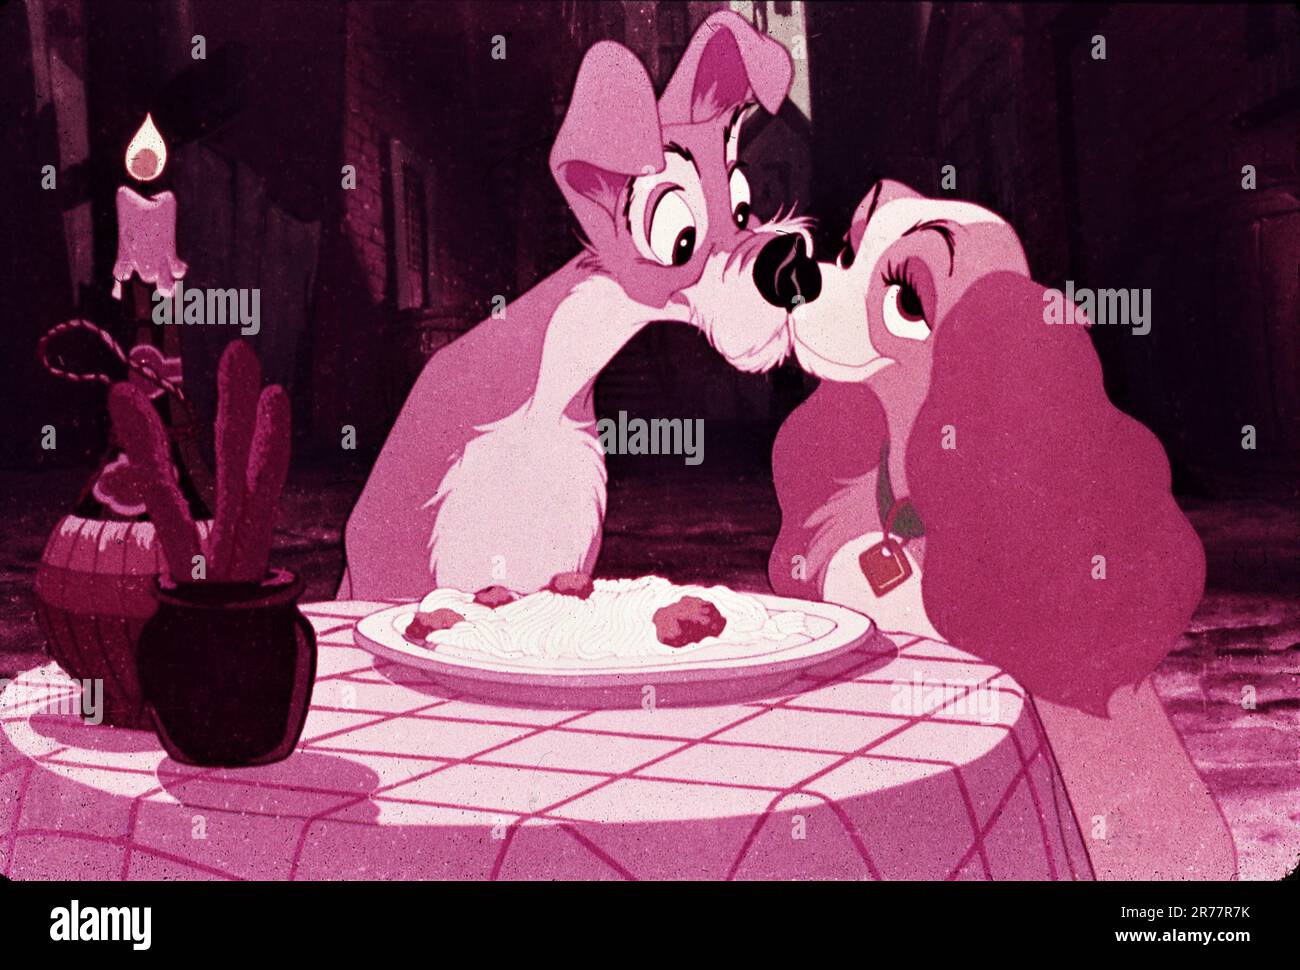 Spaghetti Meal in WALT DISNEY'S LADY AND THE TRAMP 1955 directors CLYDE GERONIMI WILFRED JACKSON and HAMILTON LUSKE from the story by Ward Greene Walt Disney productions / Buena Vista Film Distribution Company Stock Photo